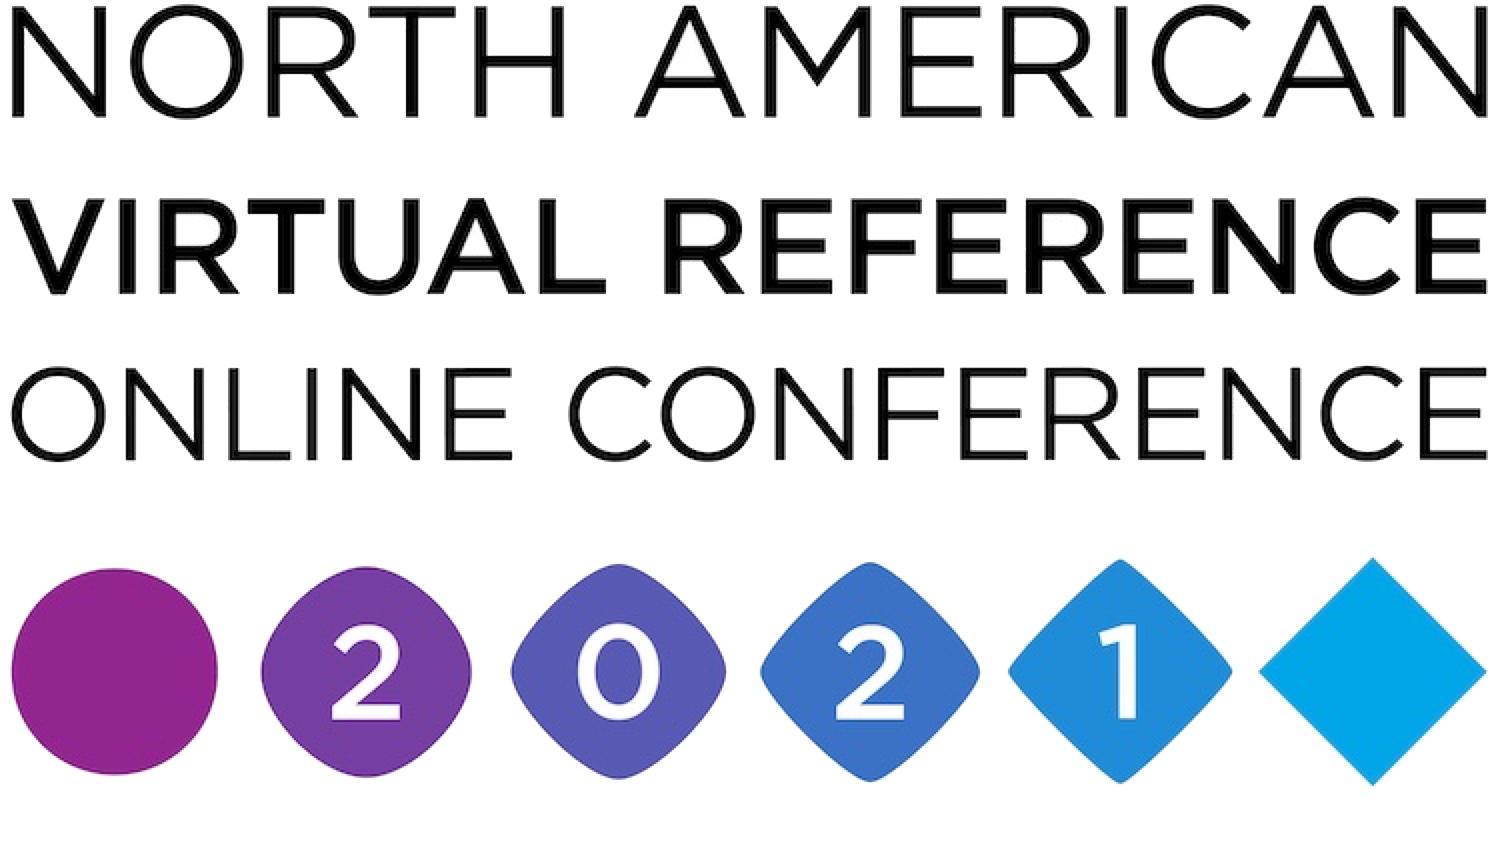 North American Virtual Reference Online Conference logo.